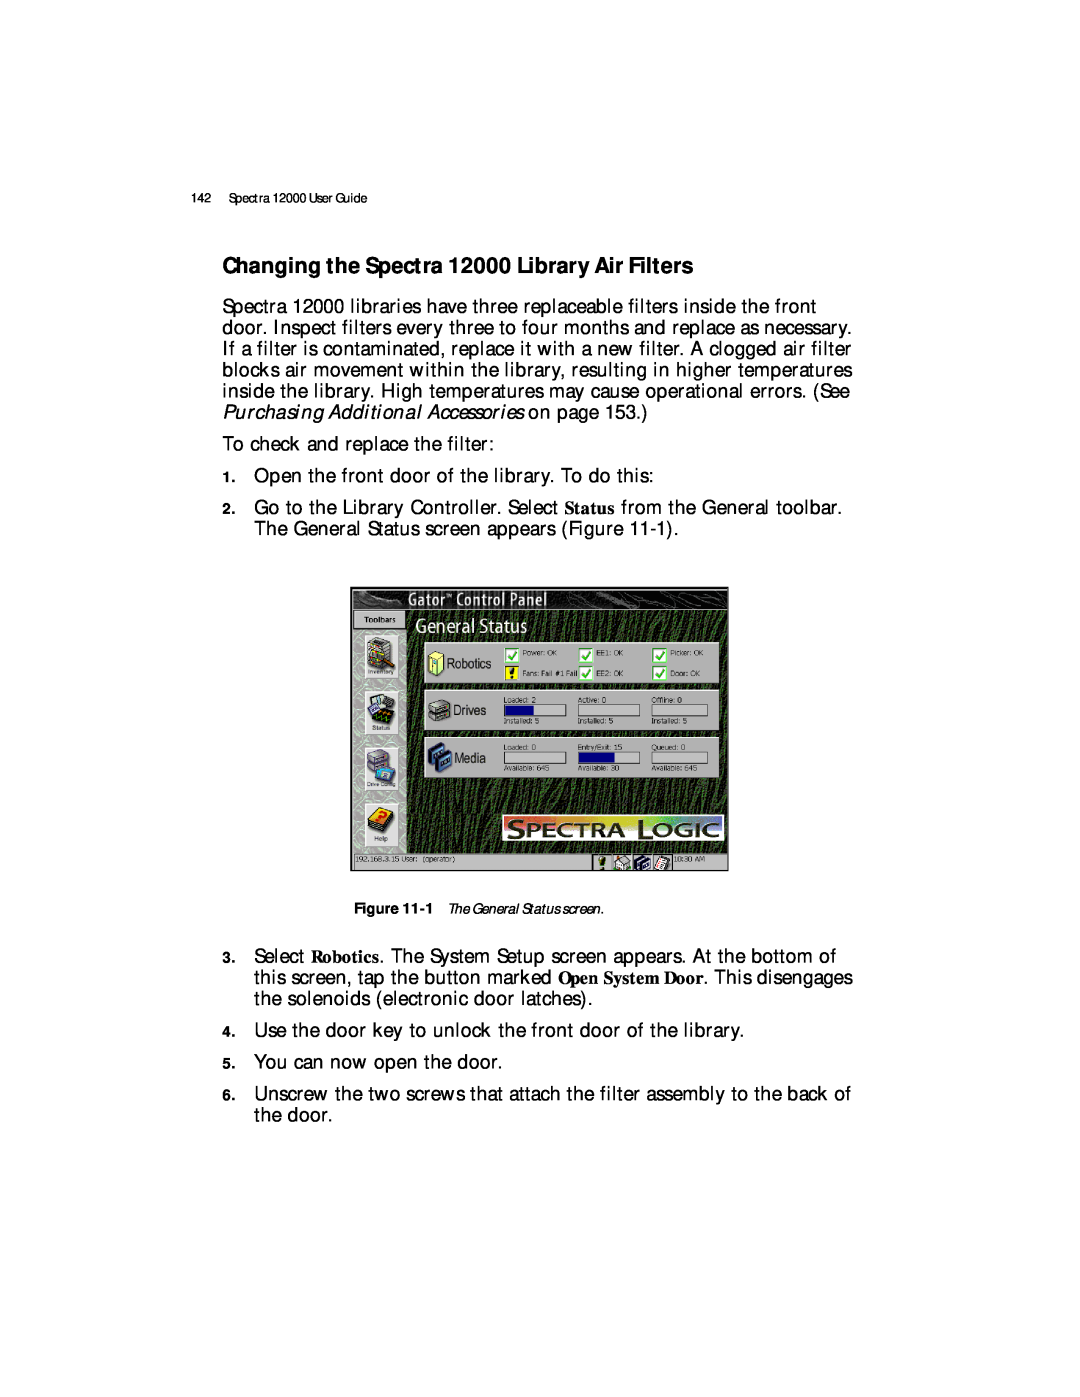 Spectra Logic manual Changing the Spectra 12000 Library Air Filters, 1 The General Status screen 